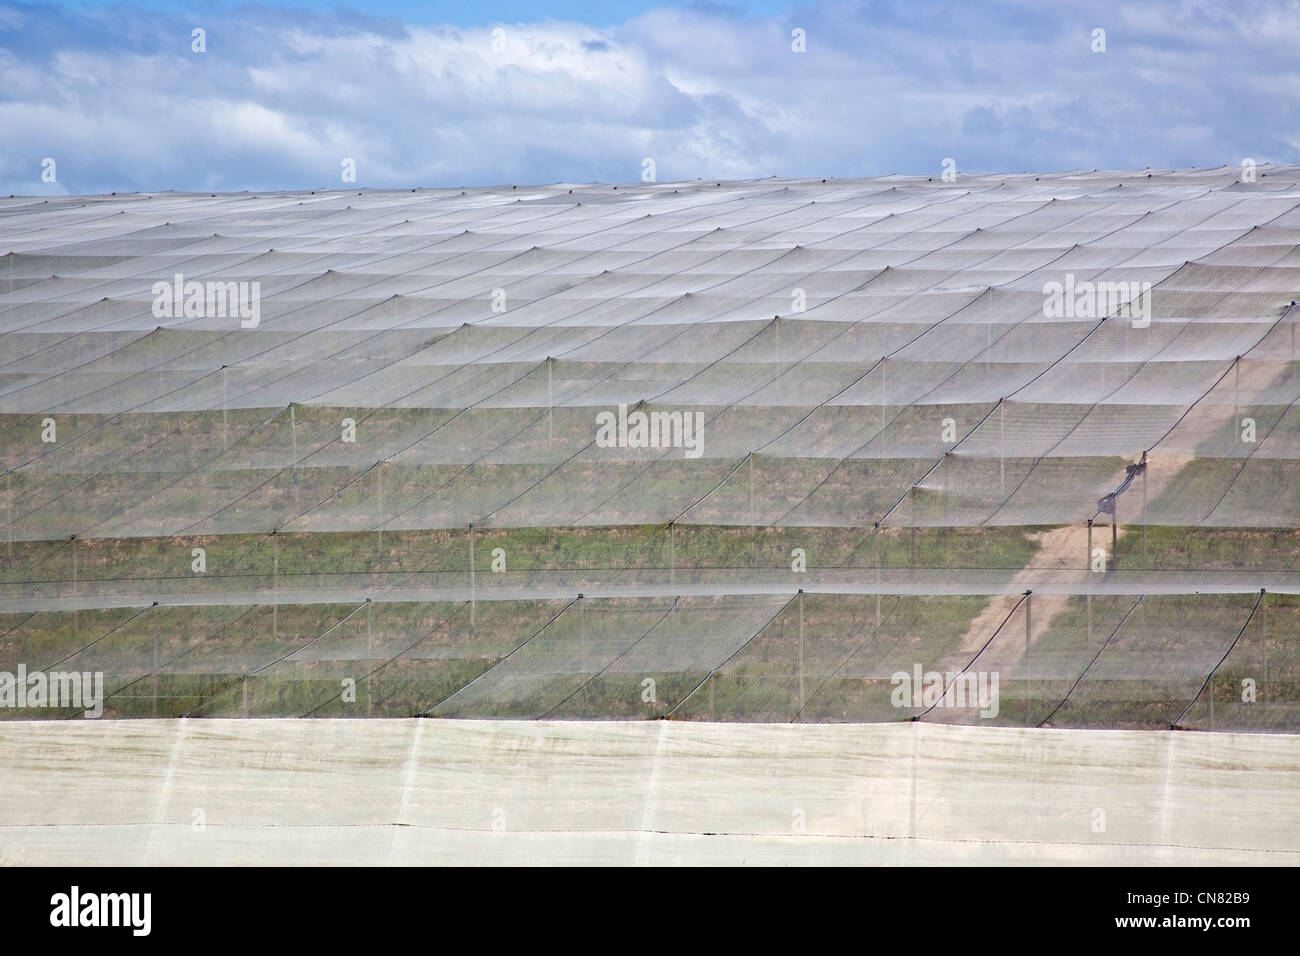 Agricultural protective sheeting on large scale, Eastern Cape, South Africa Stock Photo